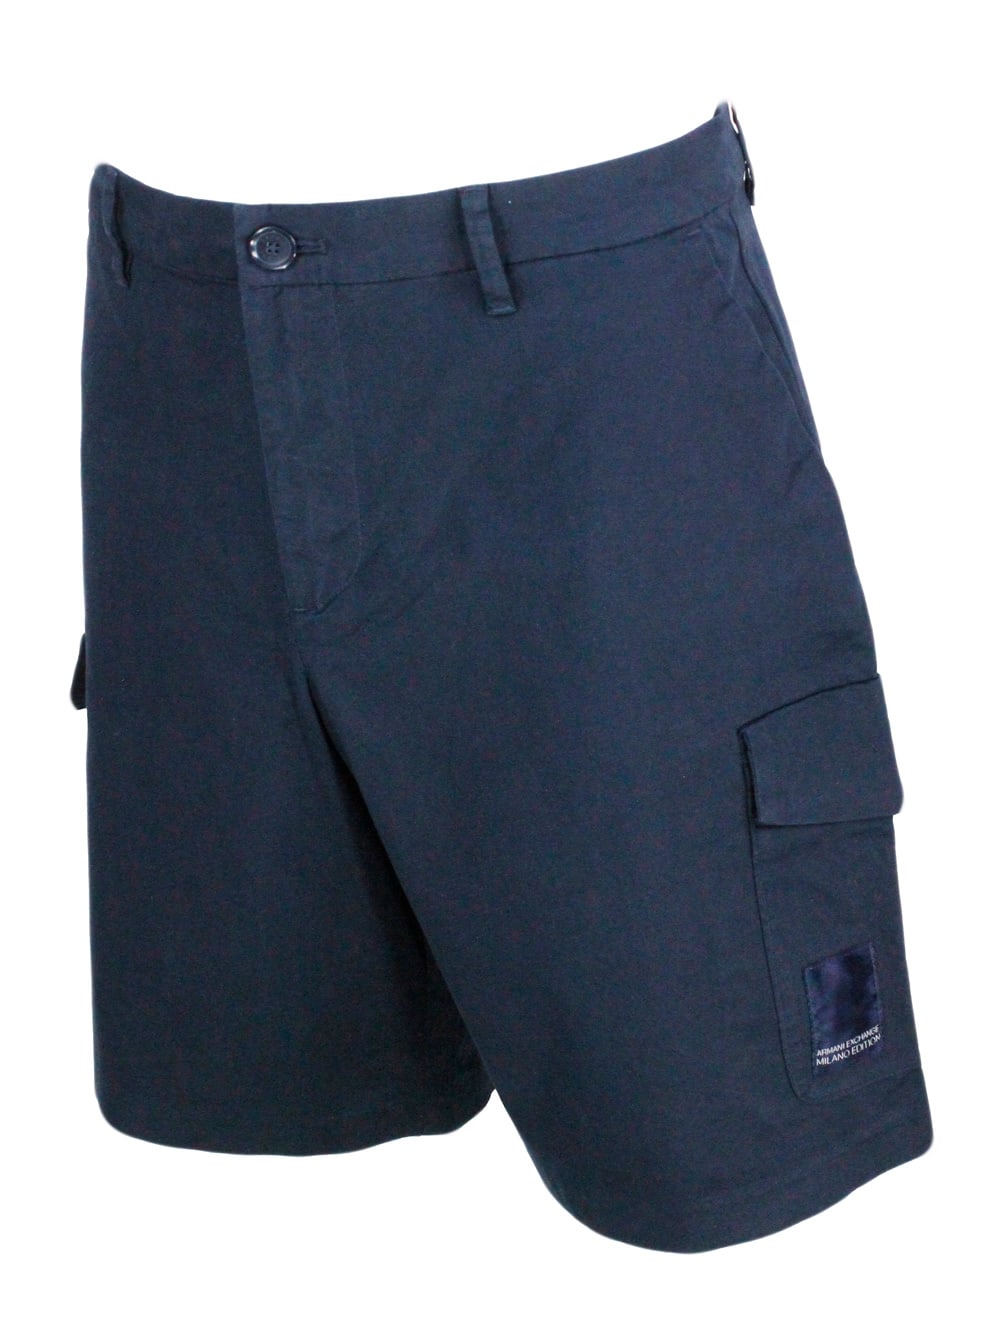 Shop Armani Collezioni Stretch Cotton Bermuda Shorts, Cargo Model With Large Pockets On The Leg And Zip And Button Closure In Blu